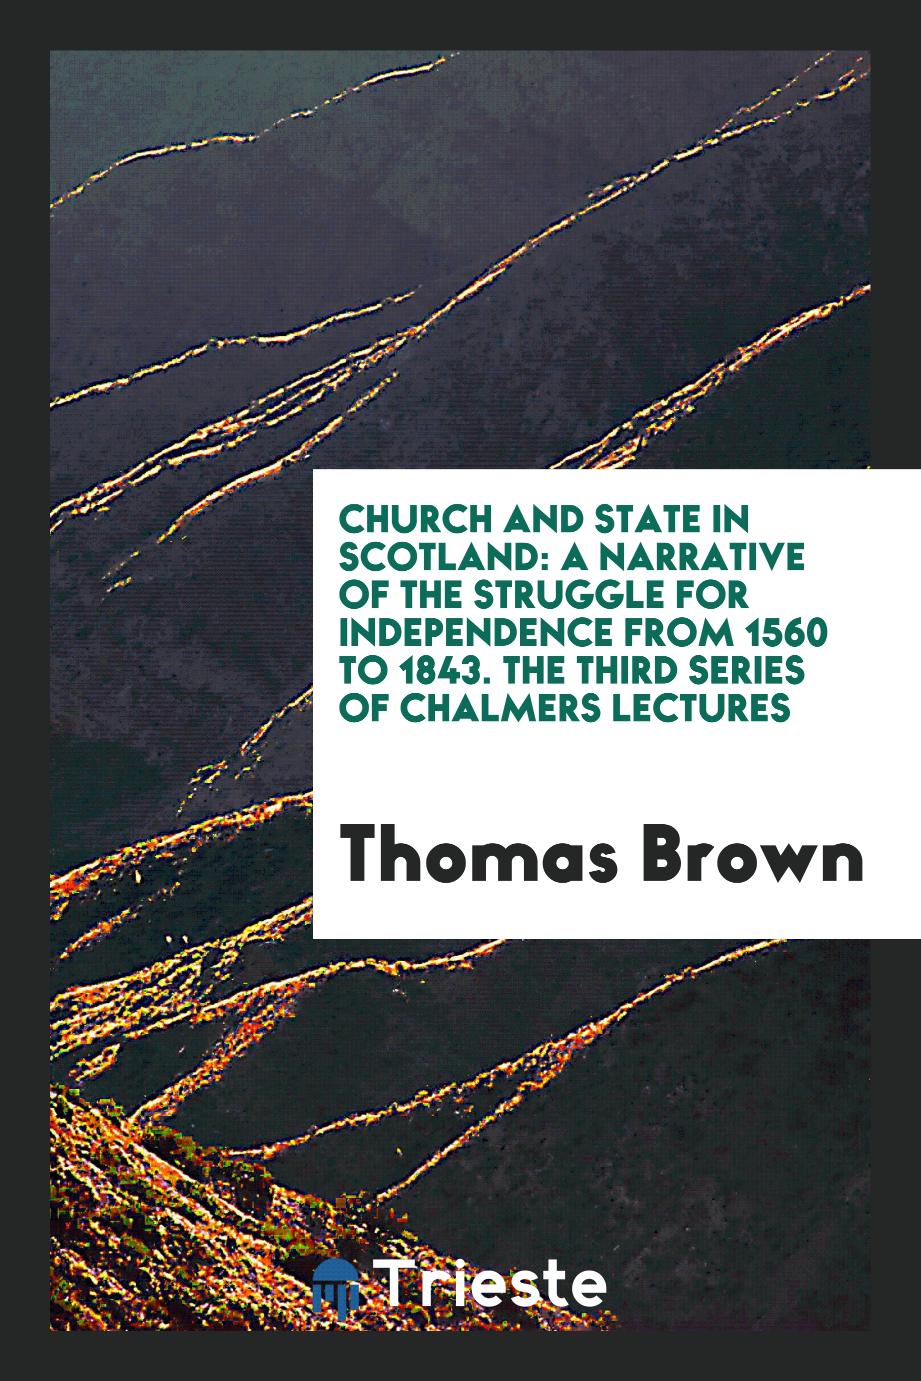 Church and State in Scotland: A Narrative of the Struggle for Independence from 1560 to 1843. The Third Series of Chalmers Lectures